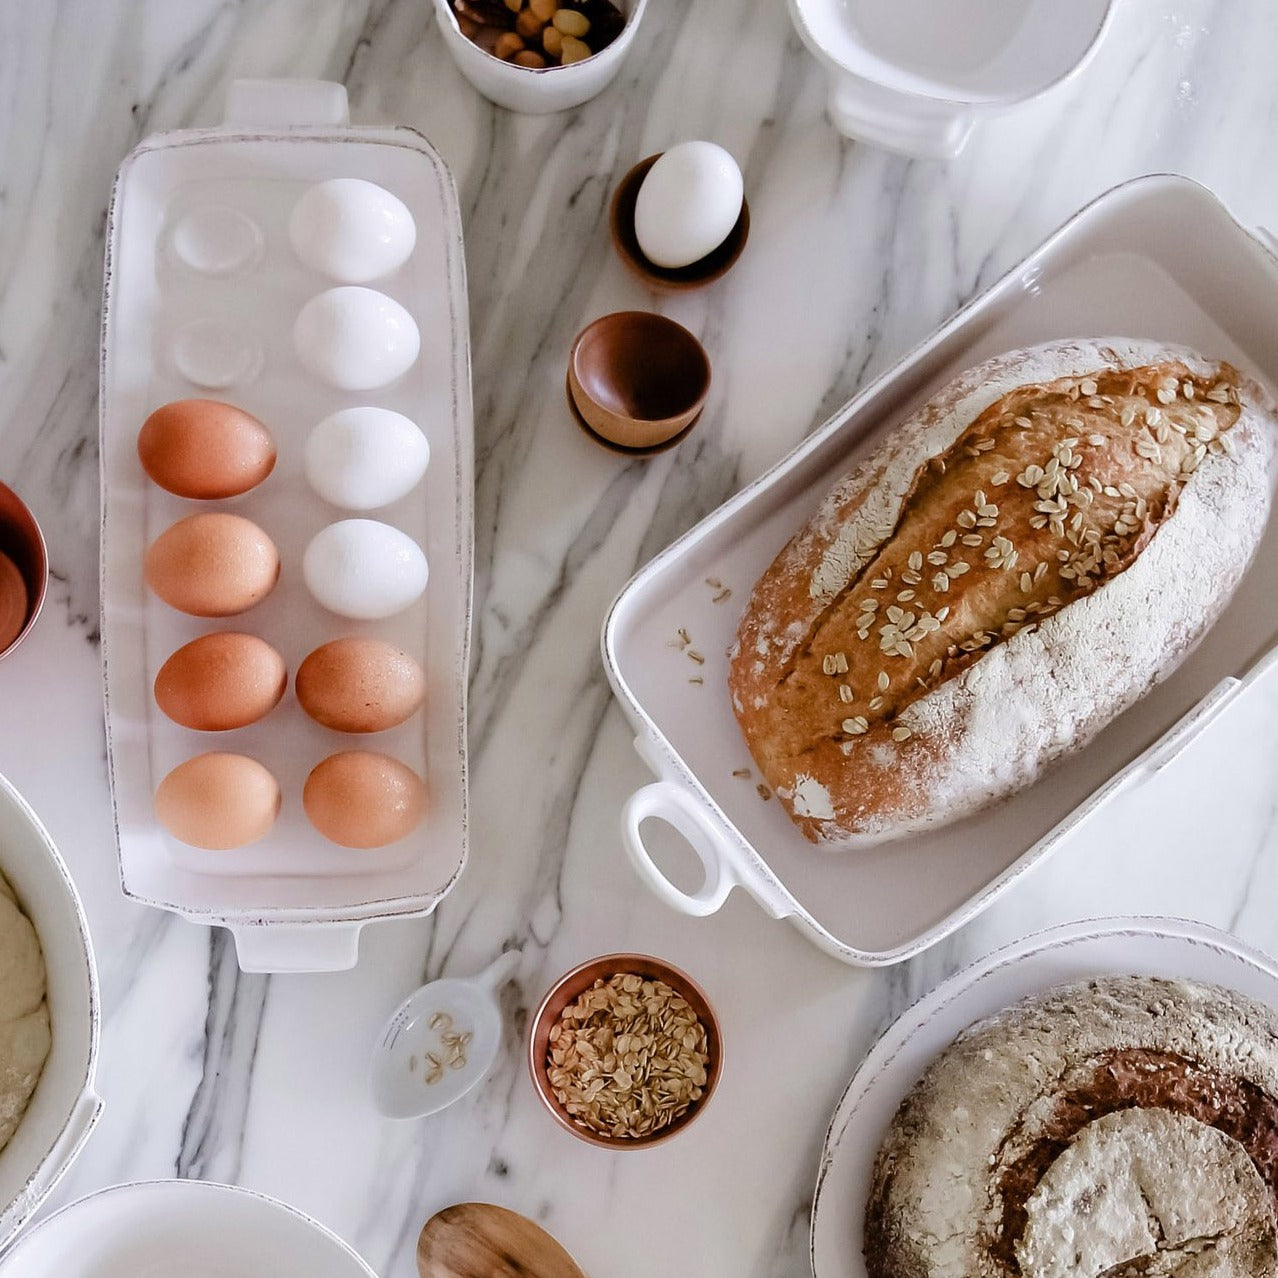 baking dish with loaf of bread, tray of eggs, and an array of small bowls arranged on a marble countertop.